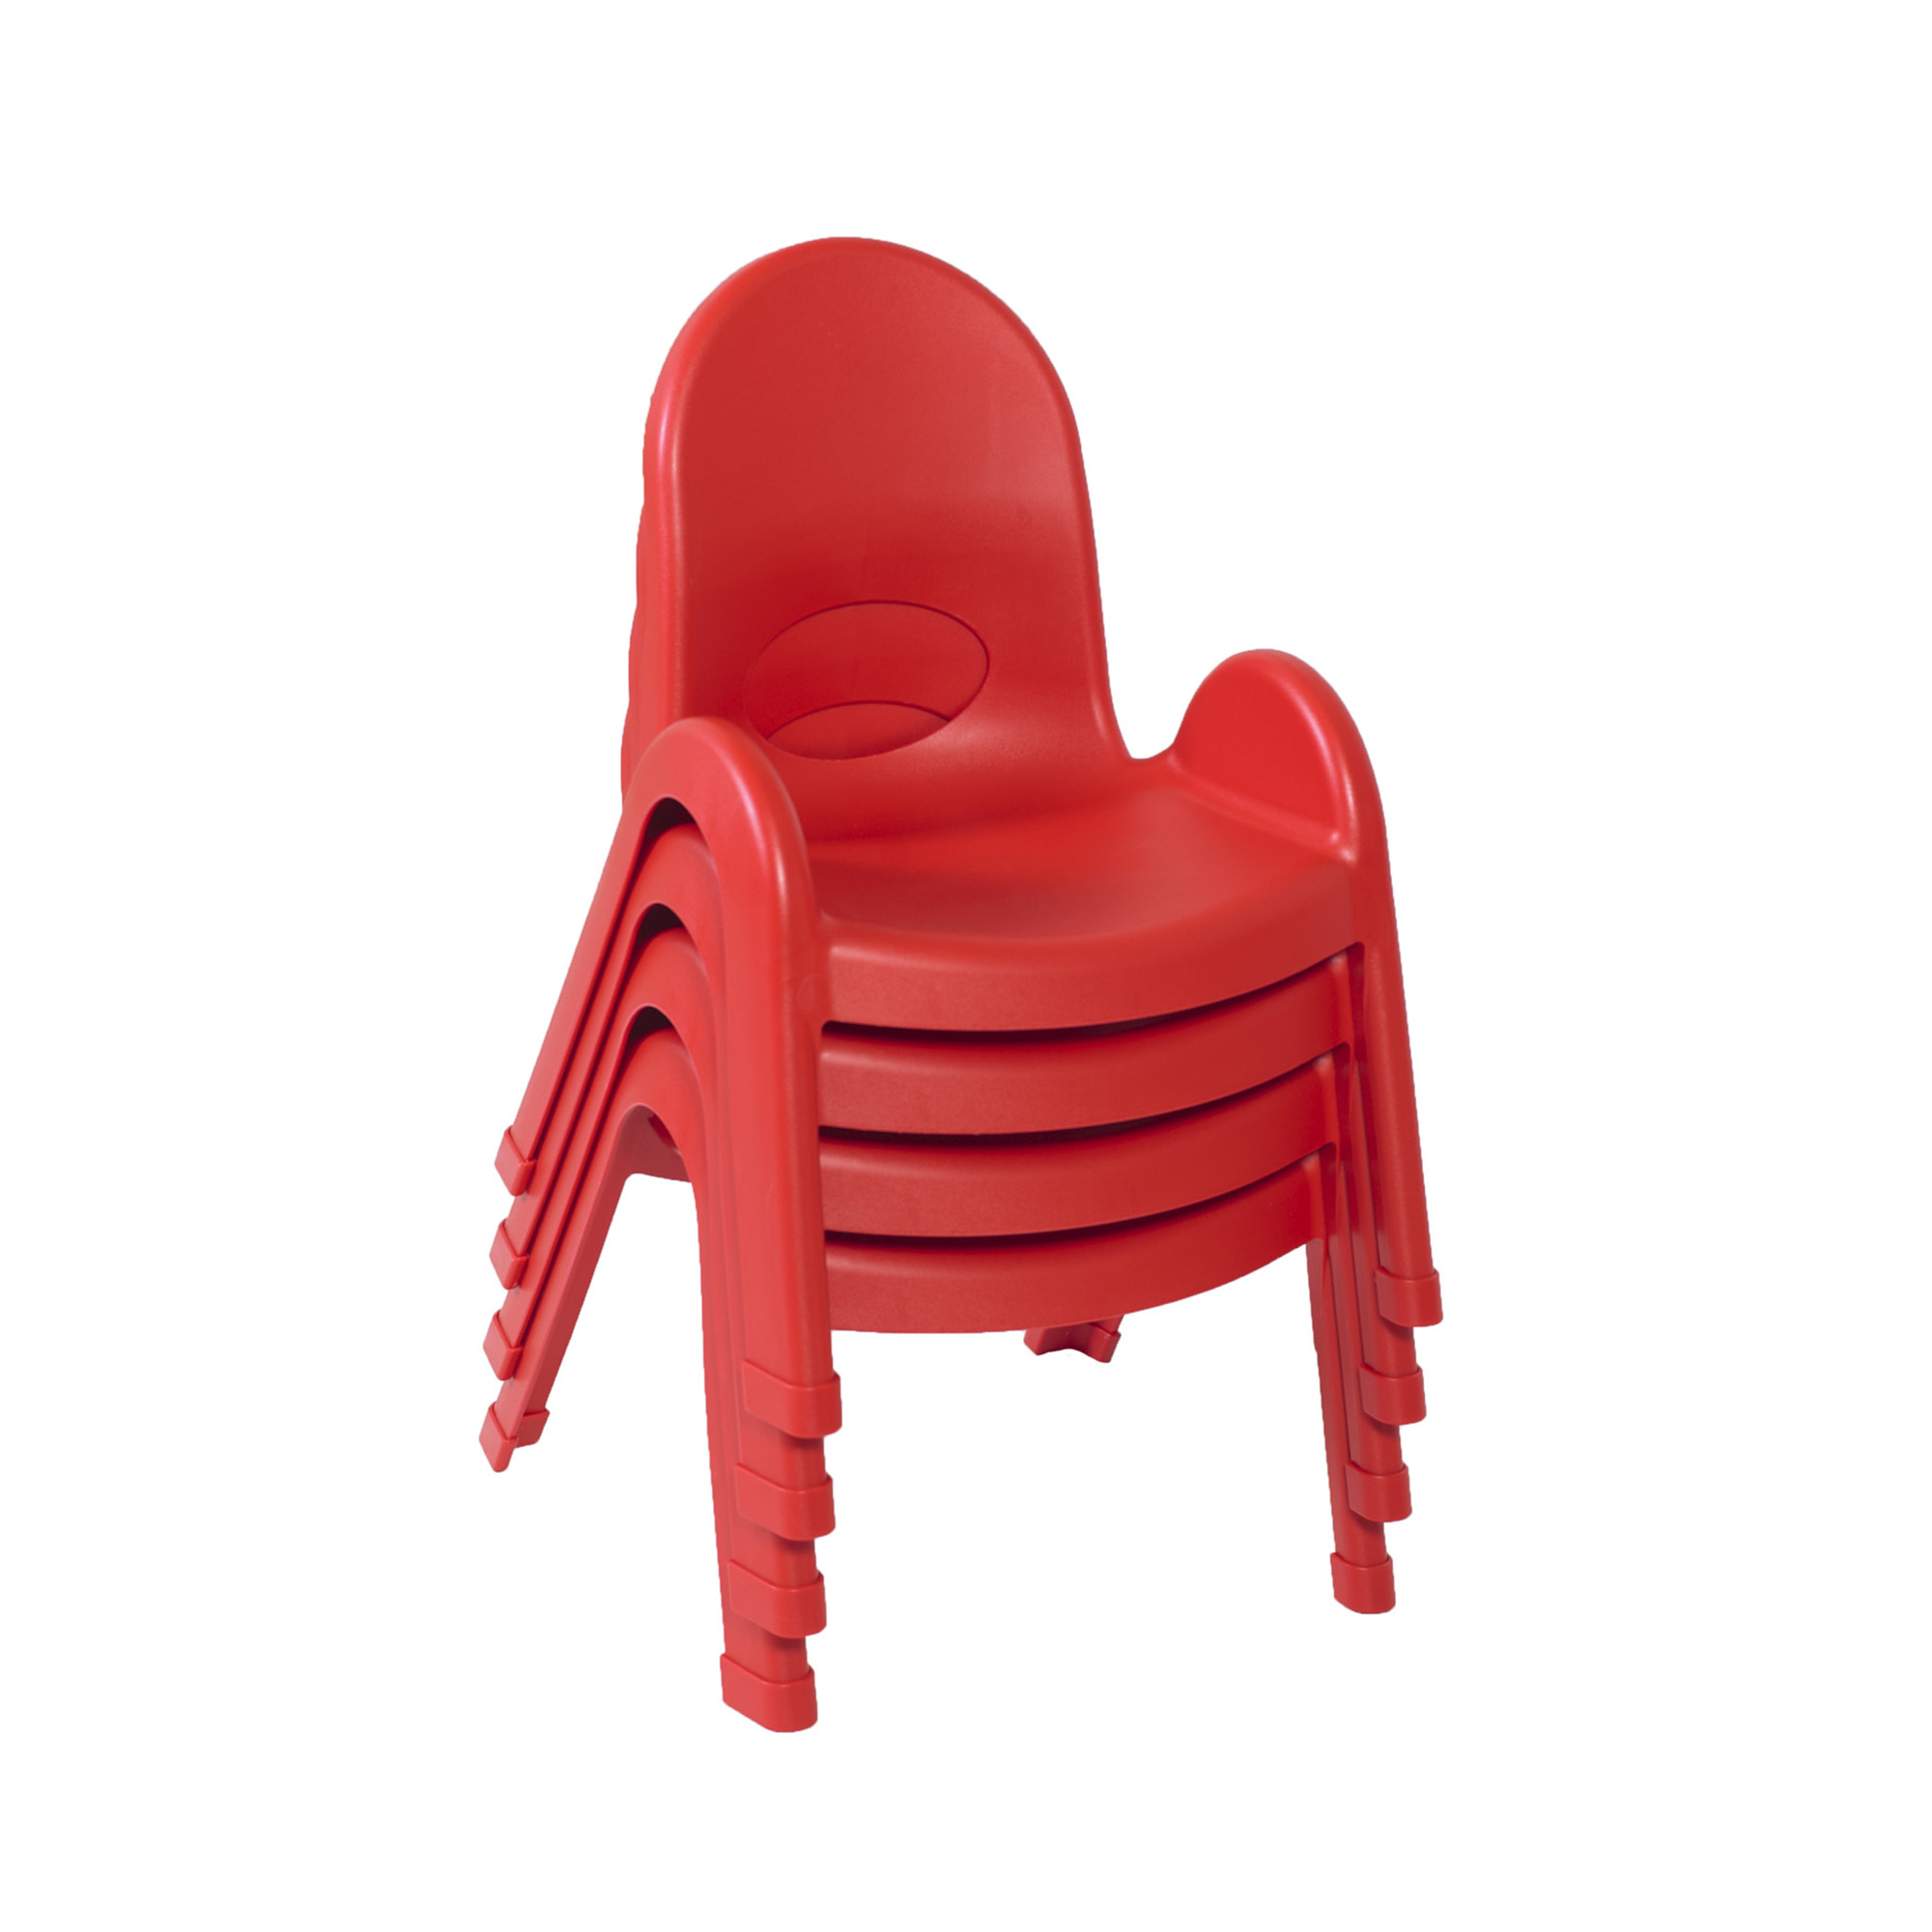 Value Stack™ 18 cm  Chair - 4 Pack - Candy Apple Red